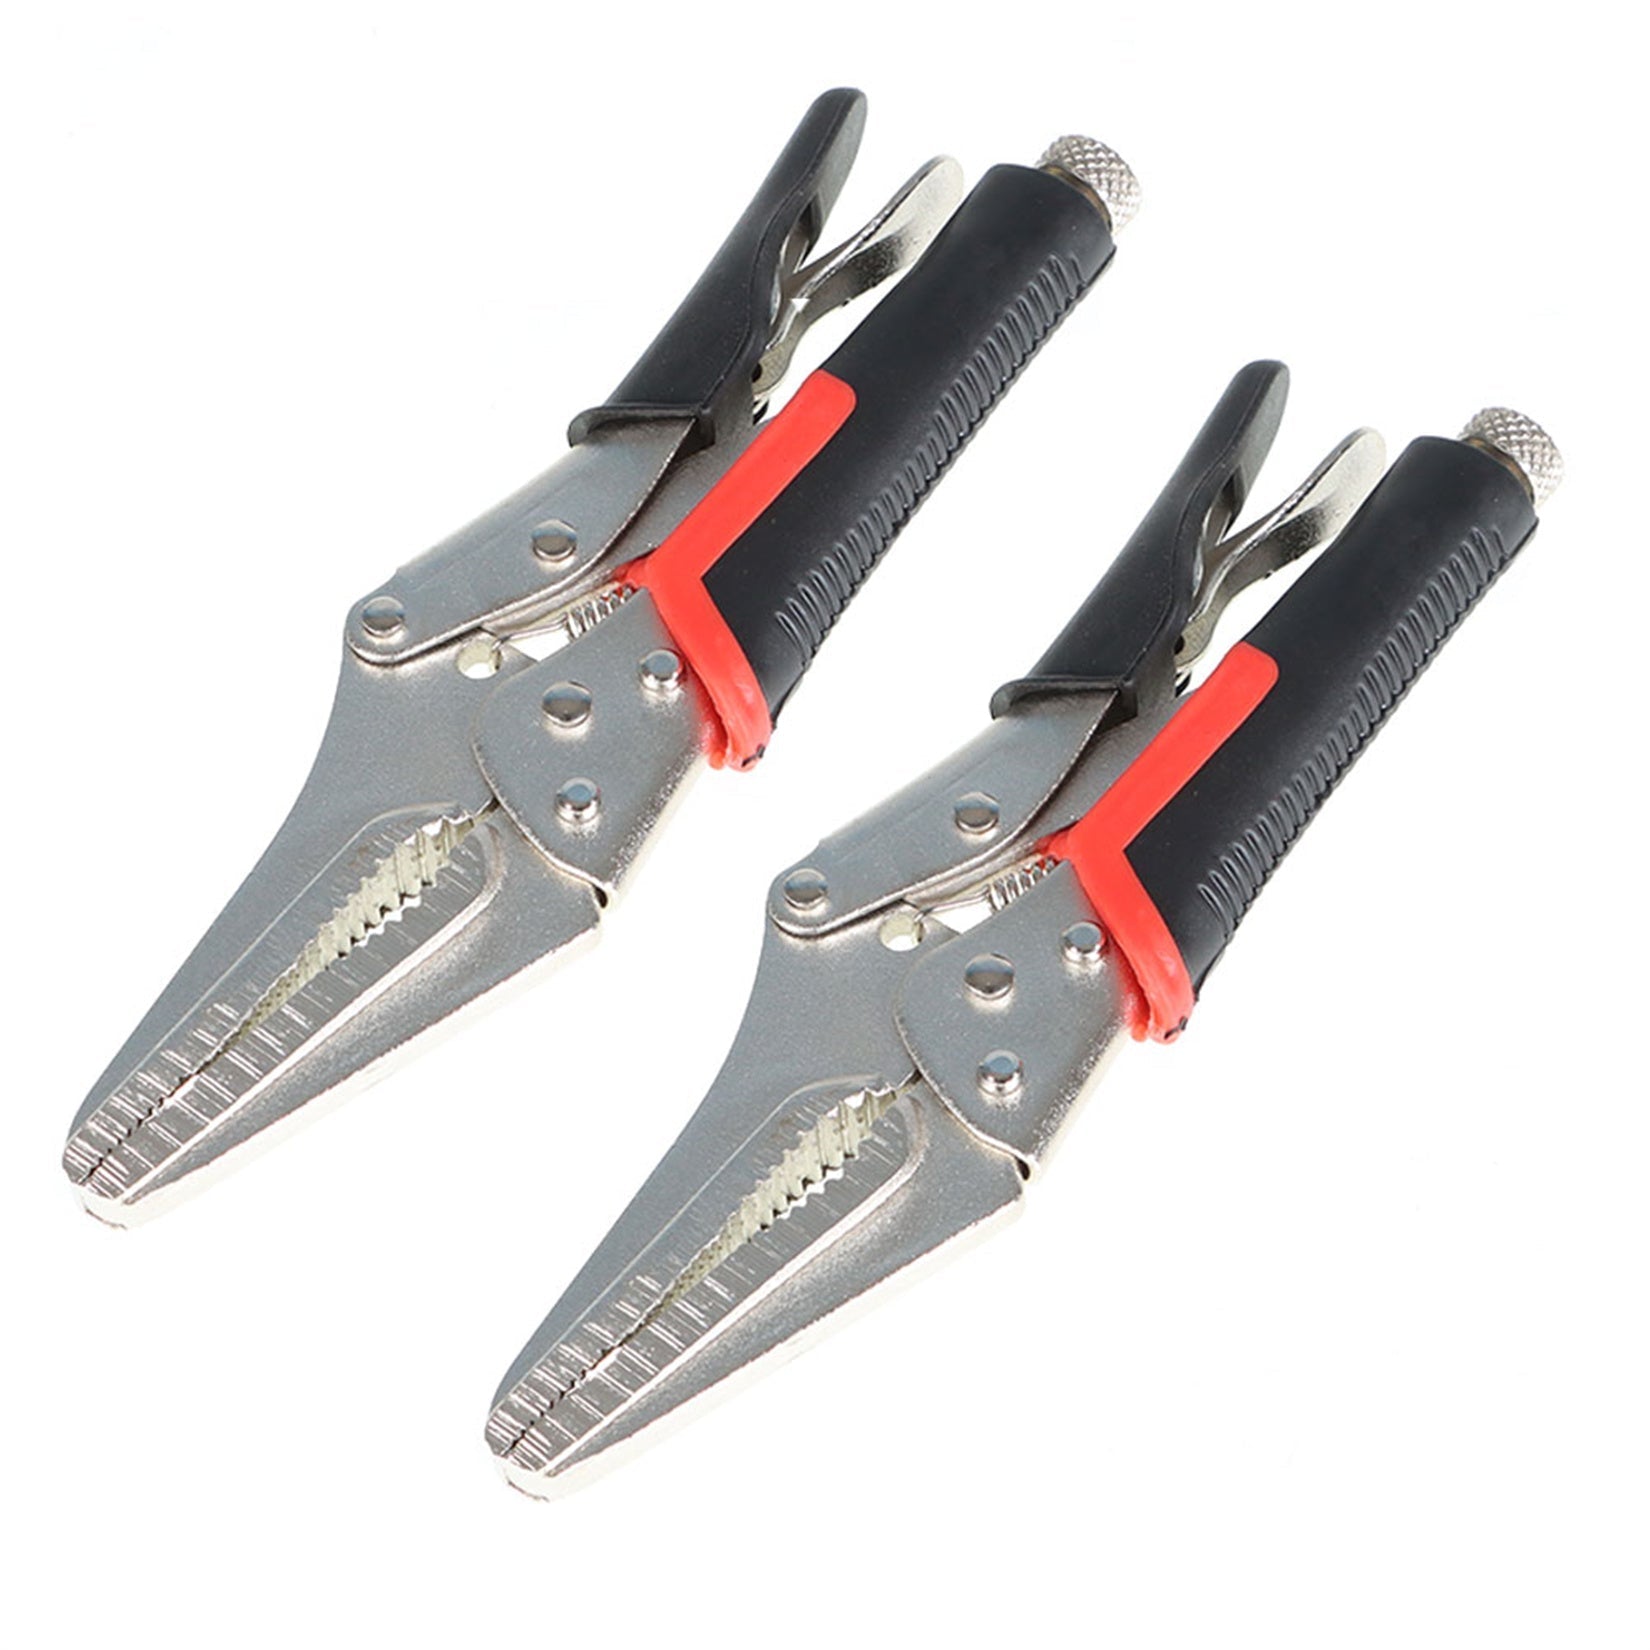 findmall  2Pcs 6 Inch Long-nose Torque Lock Locking Plier Set Chrome-vanadium Steel Fast Setup Easy Release for Home and Workshop Use FINDMALLPARTS